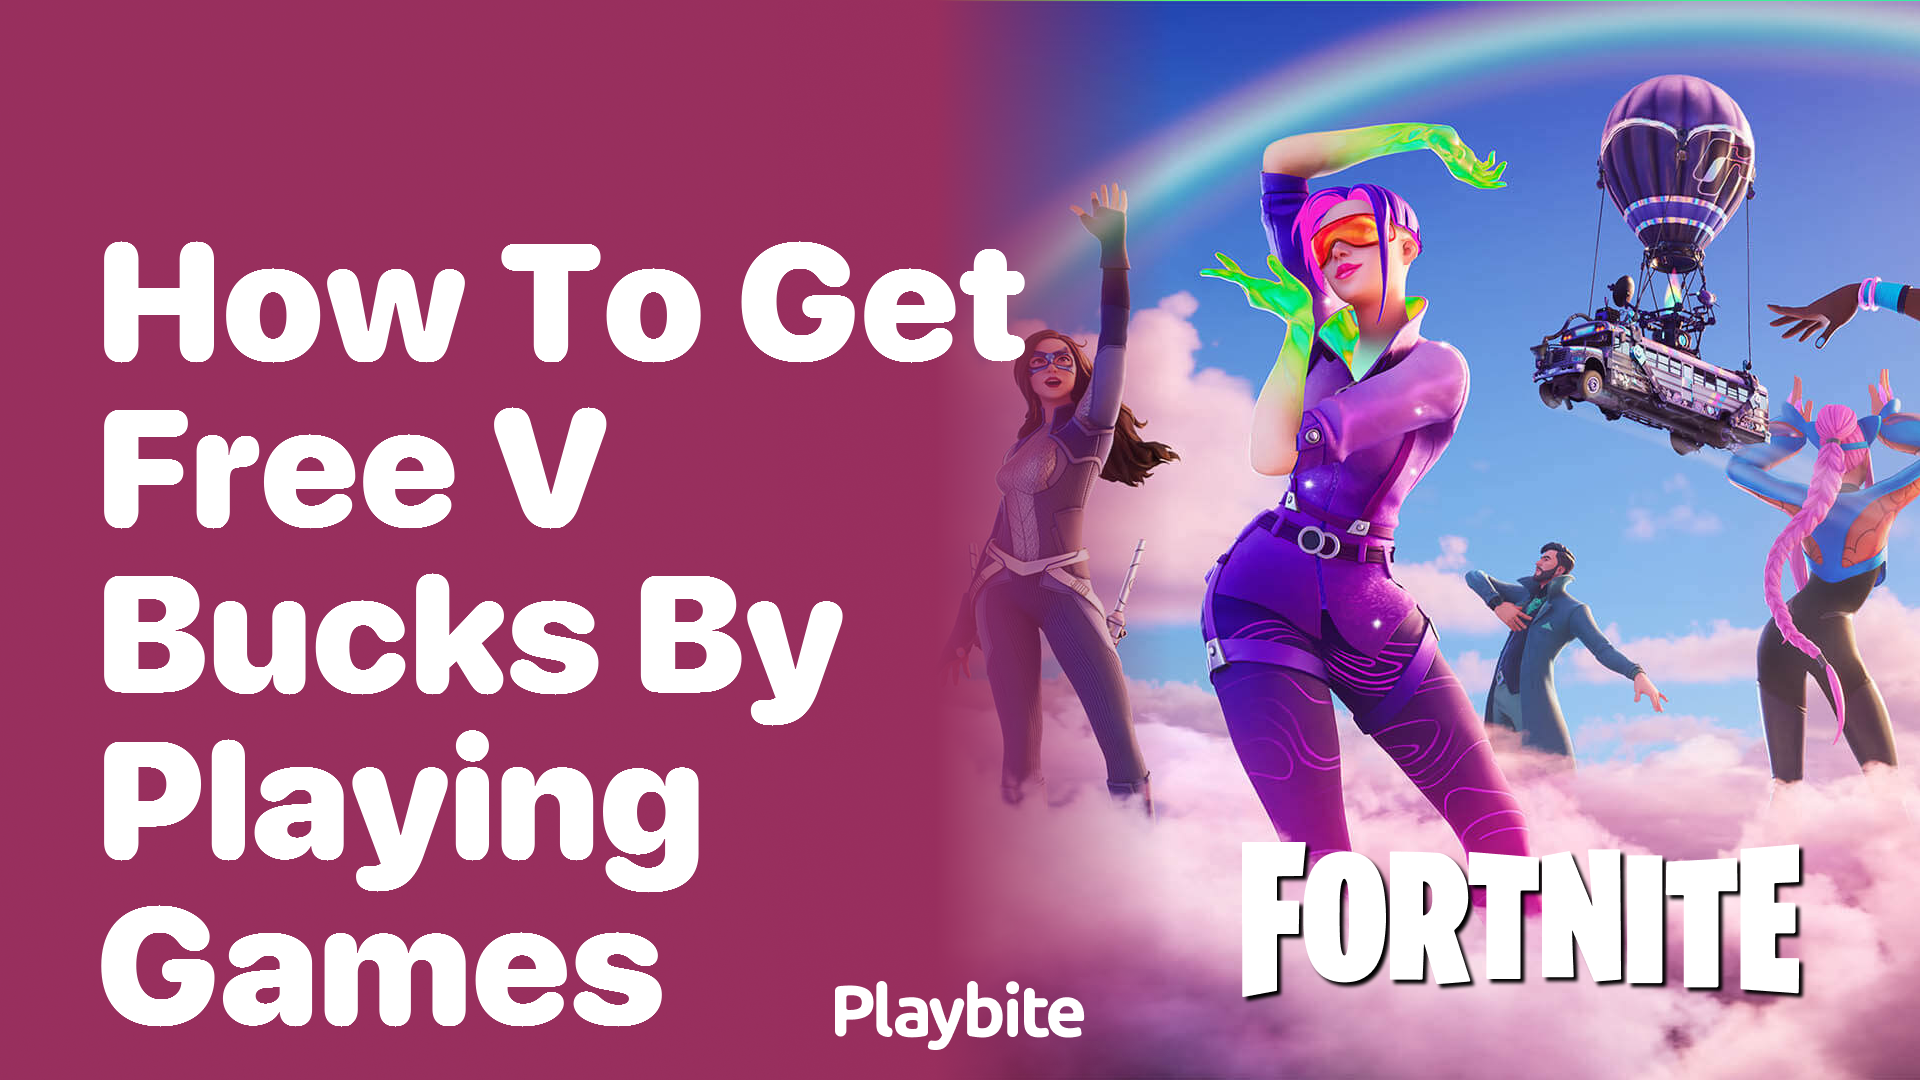 How to Get Free V-Bucks by Playing Games